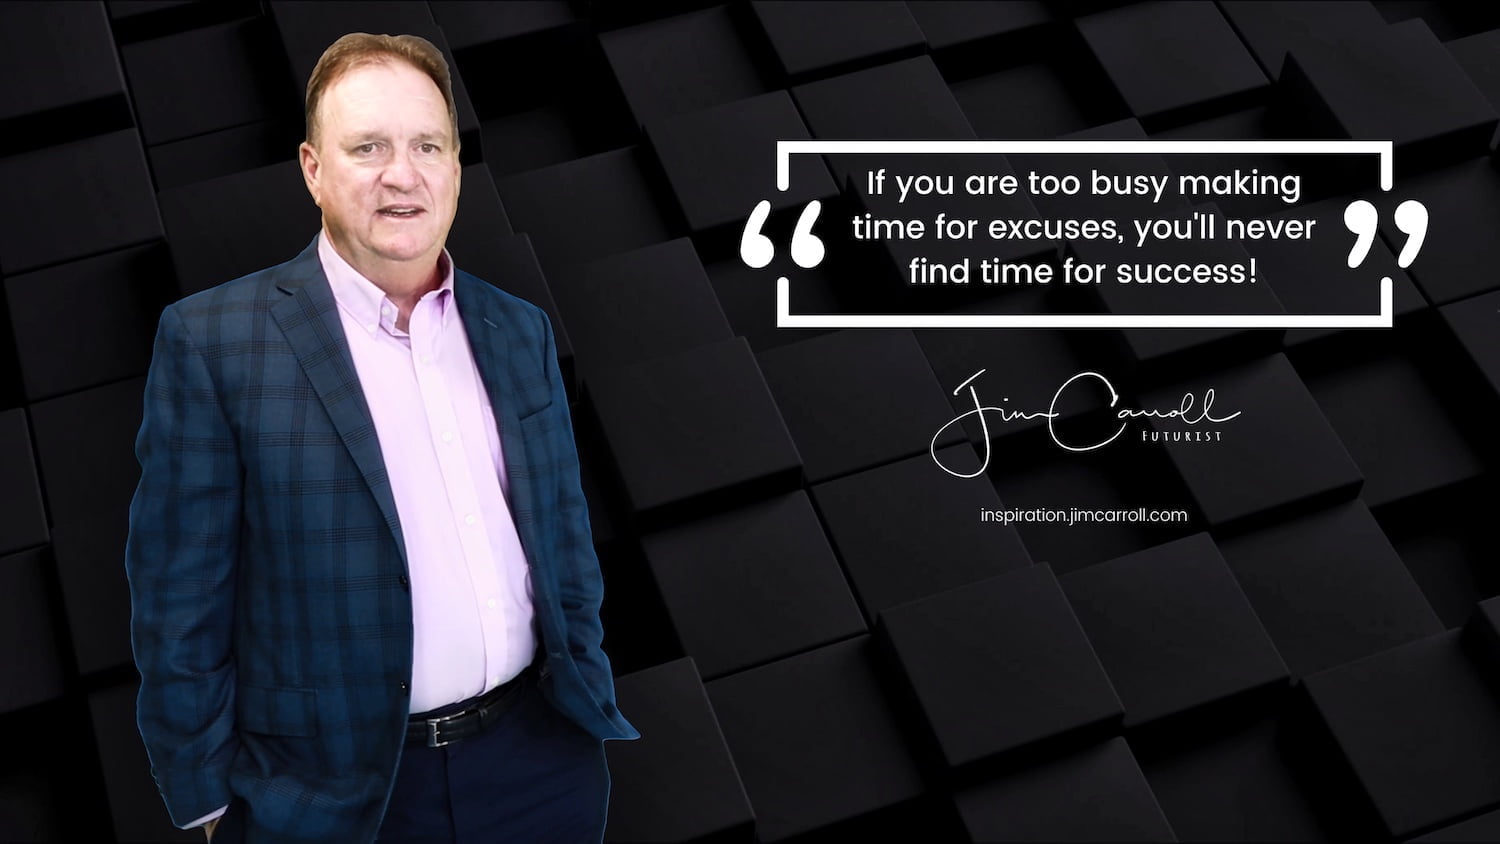 Daily Inspiration: "If you are too busy making time for excuses, you'll never find time for success!"